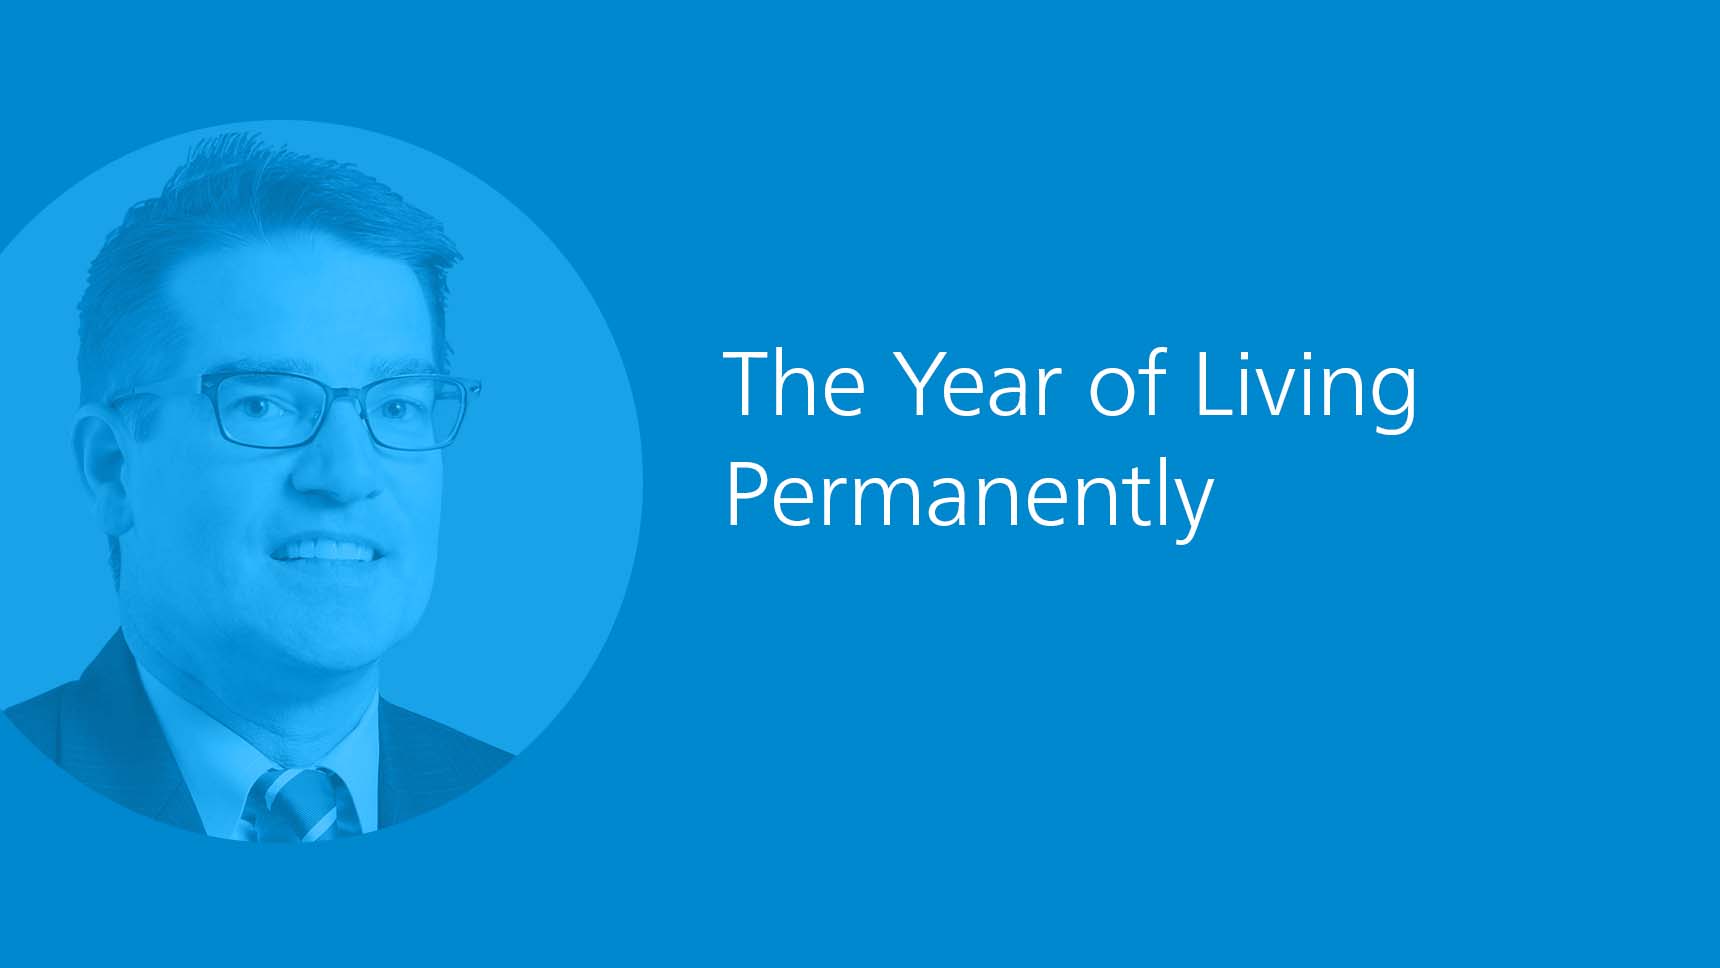 The Year of Living Permanently